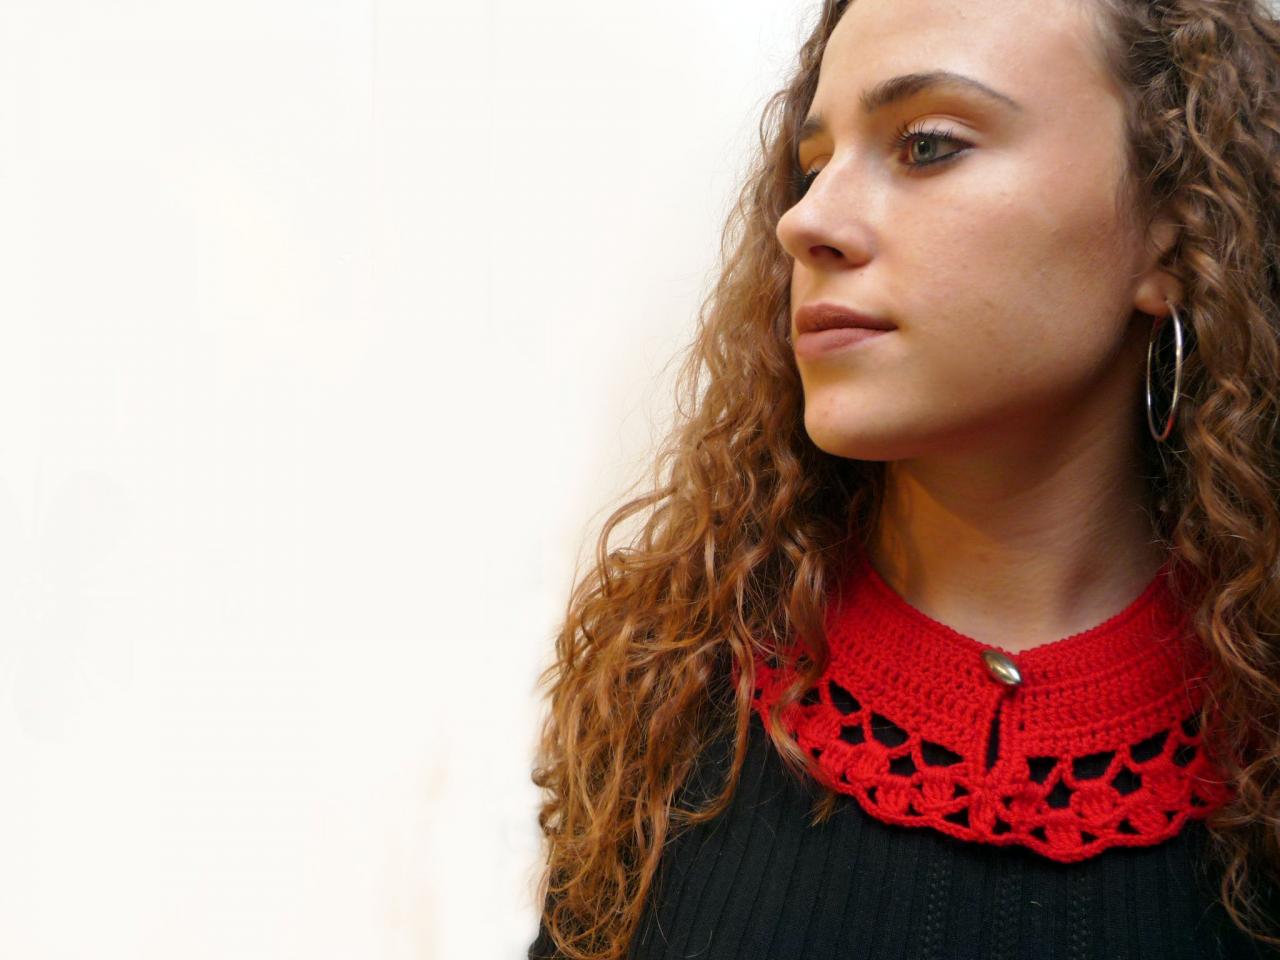 Crochet Peter Pan Collar in Red Wool with Silver Button - Womens Lacy Crochet Collar - LITTLE NINETTE